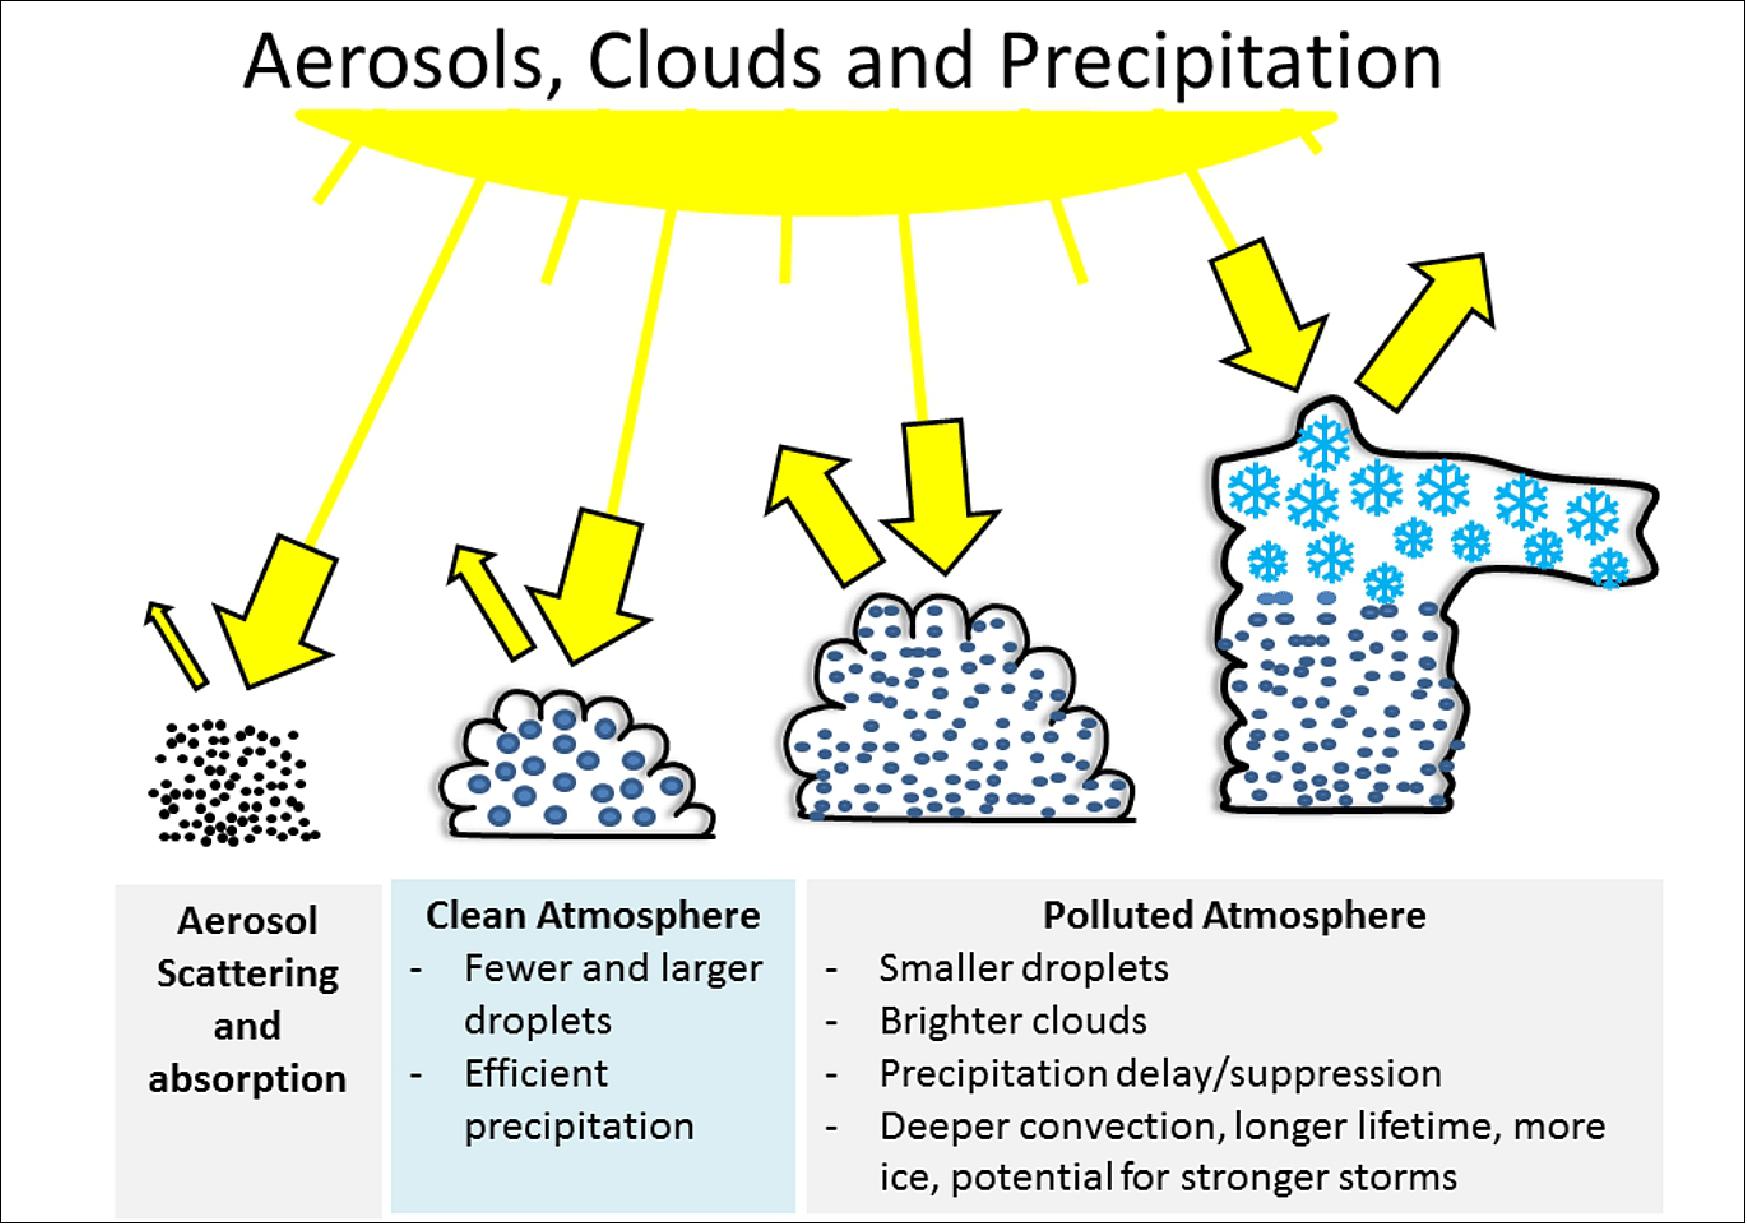 Figure 7: Pollution particles lead to precipitation changes (image credit: Martins, UMBC, CC BY-ND)